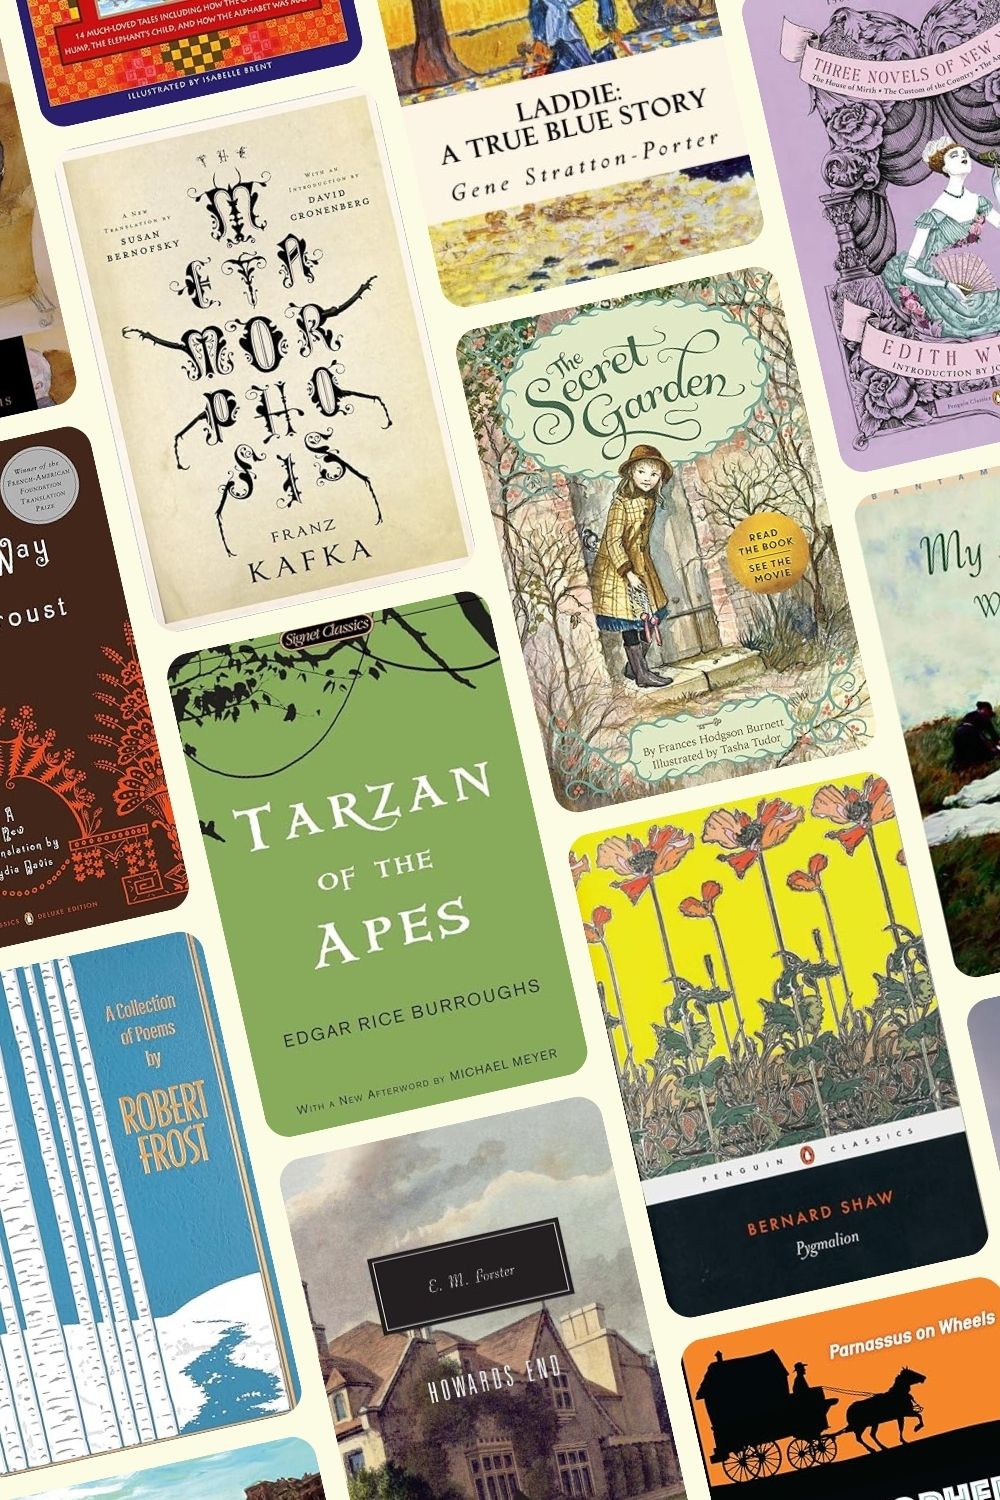 22 Books from the 1910s That Still Resonate Today (And More!)